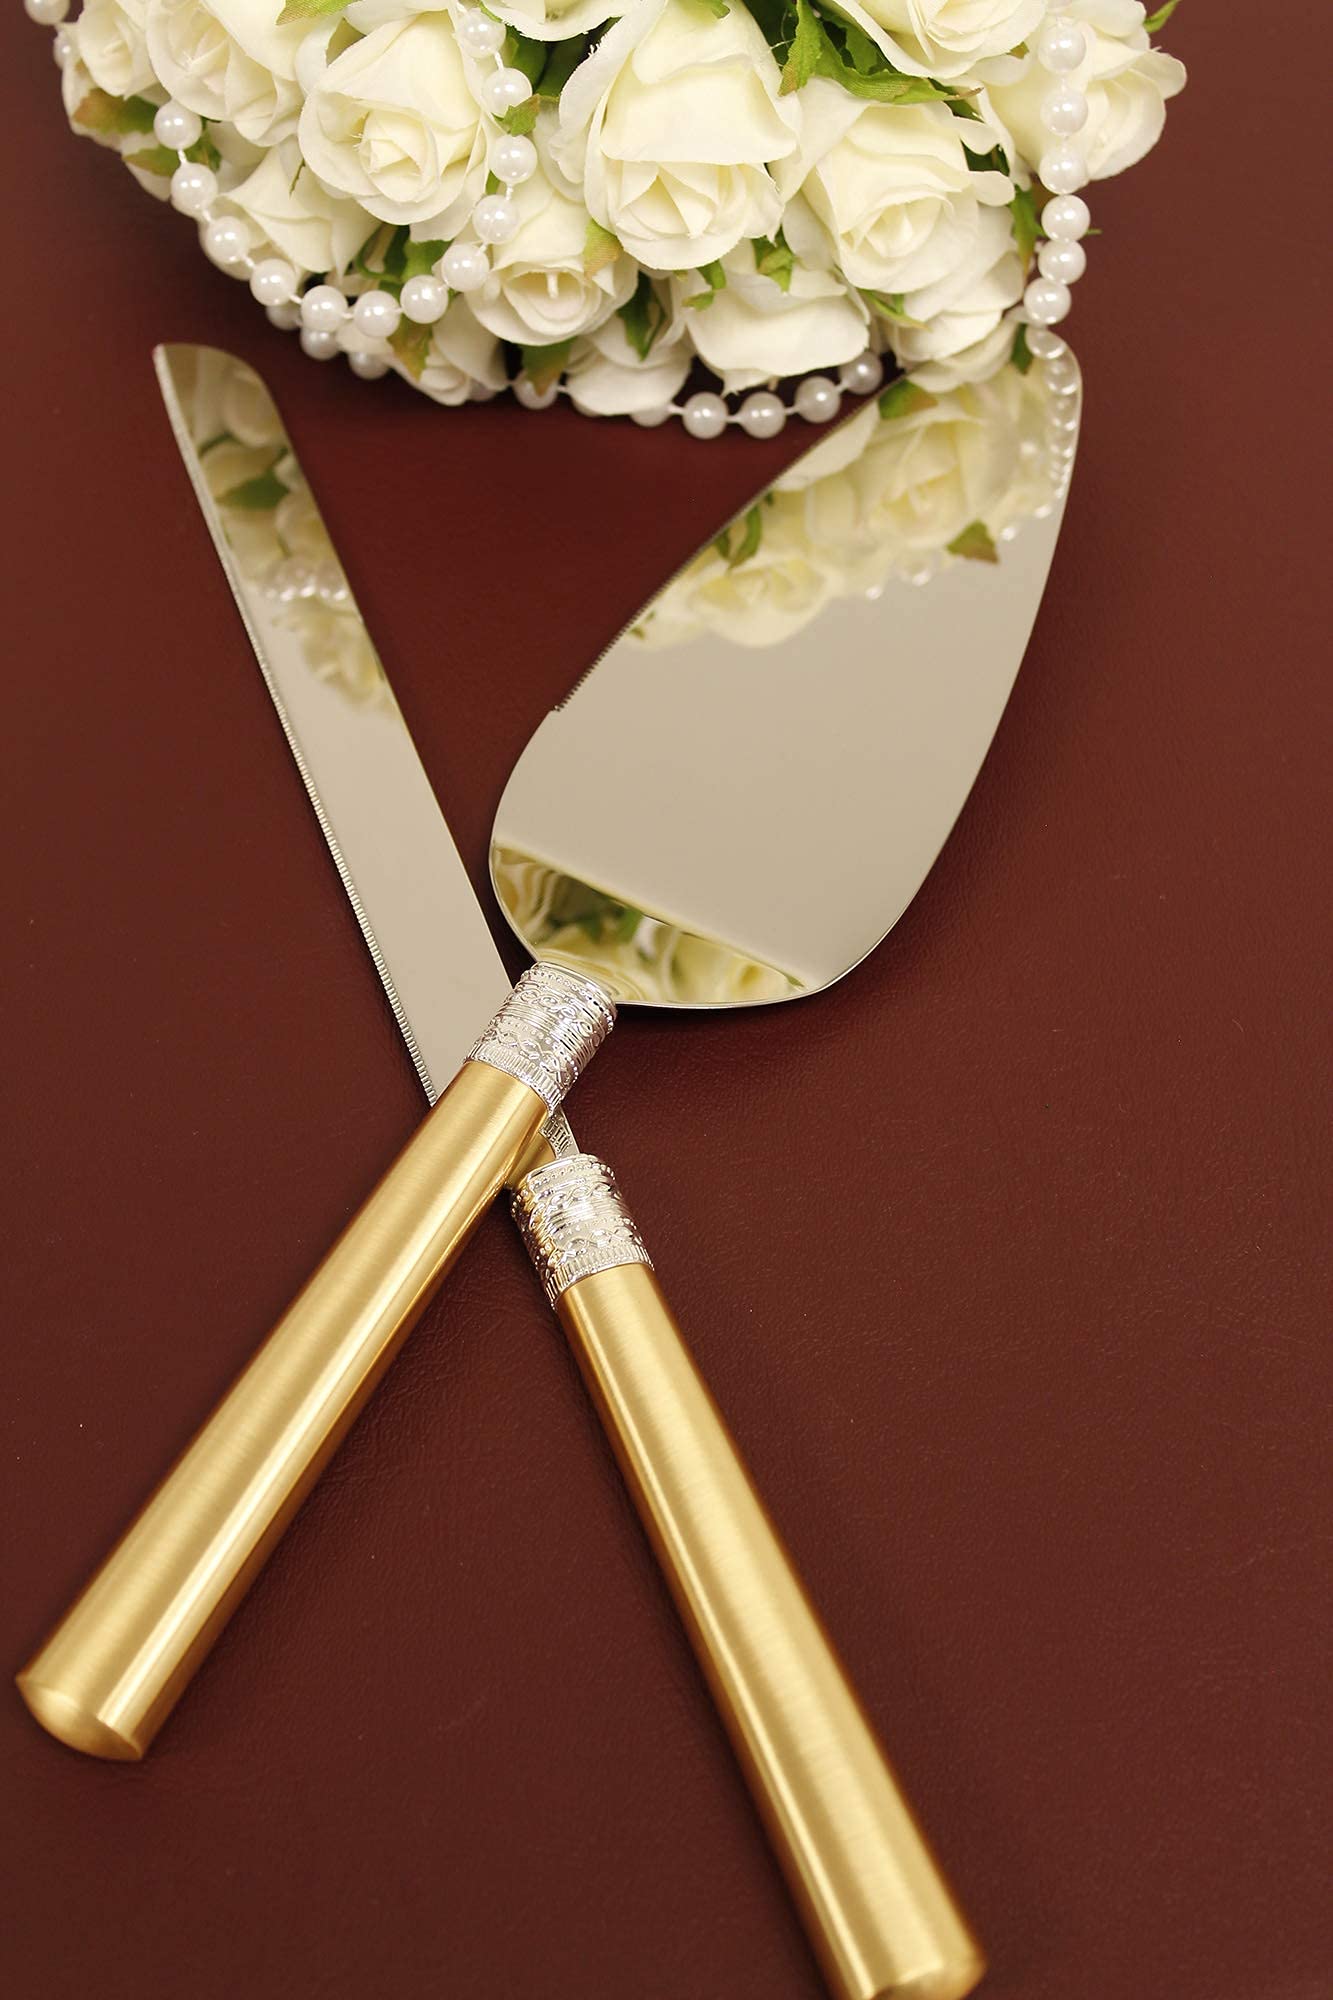 Vera Wang With Love Gold Personalized Wedding Cake Knife and Server Set, Custom Engraved Wedding Cake Cutting Set, Accessories and Gifts for the Bride and Groom